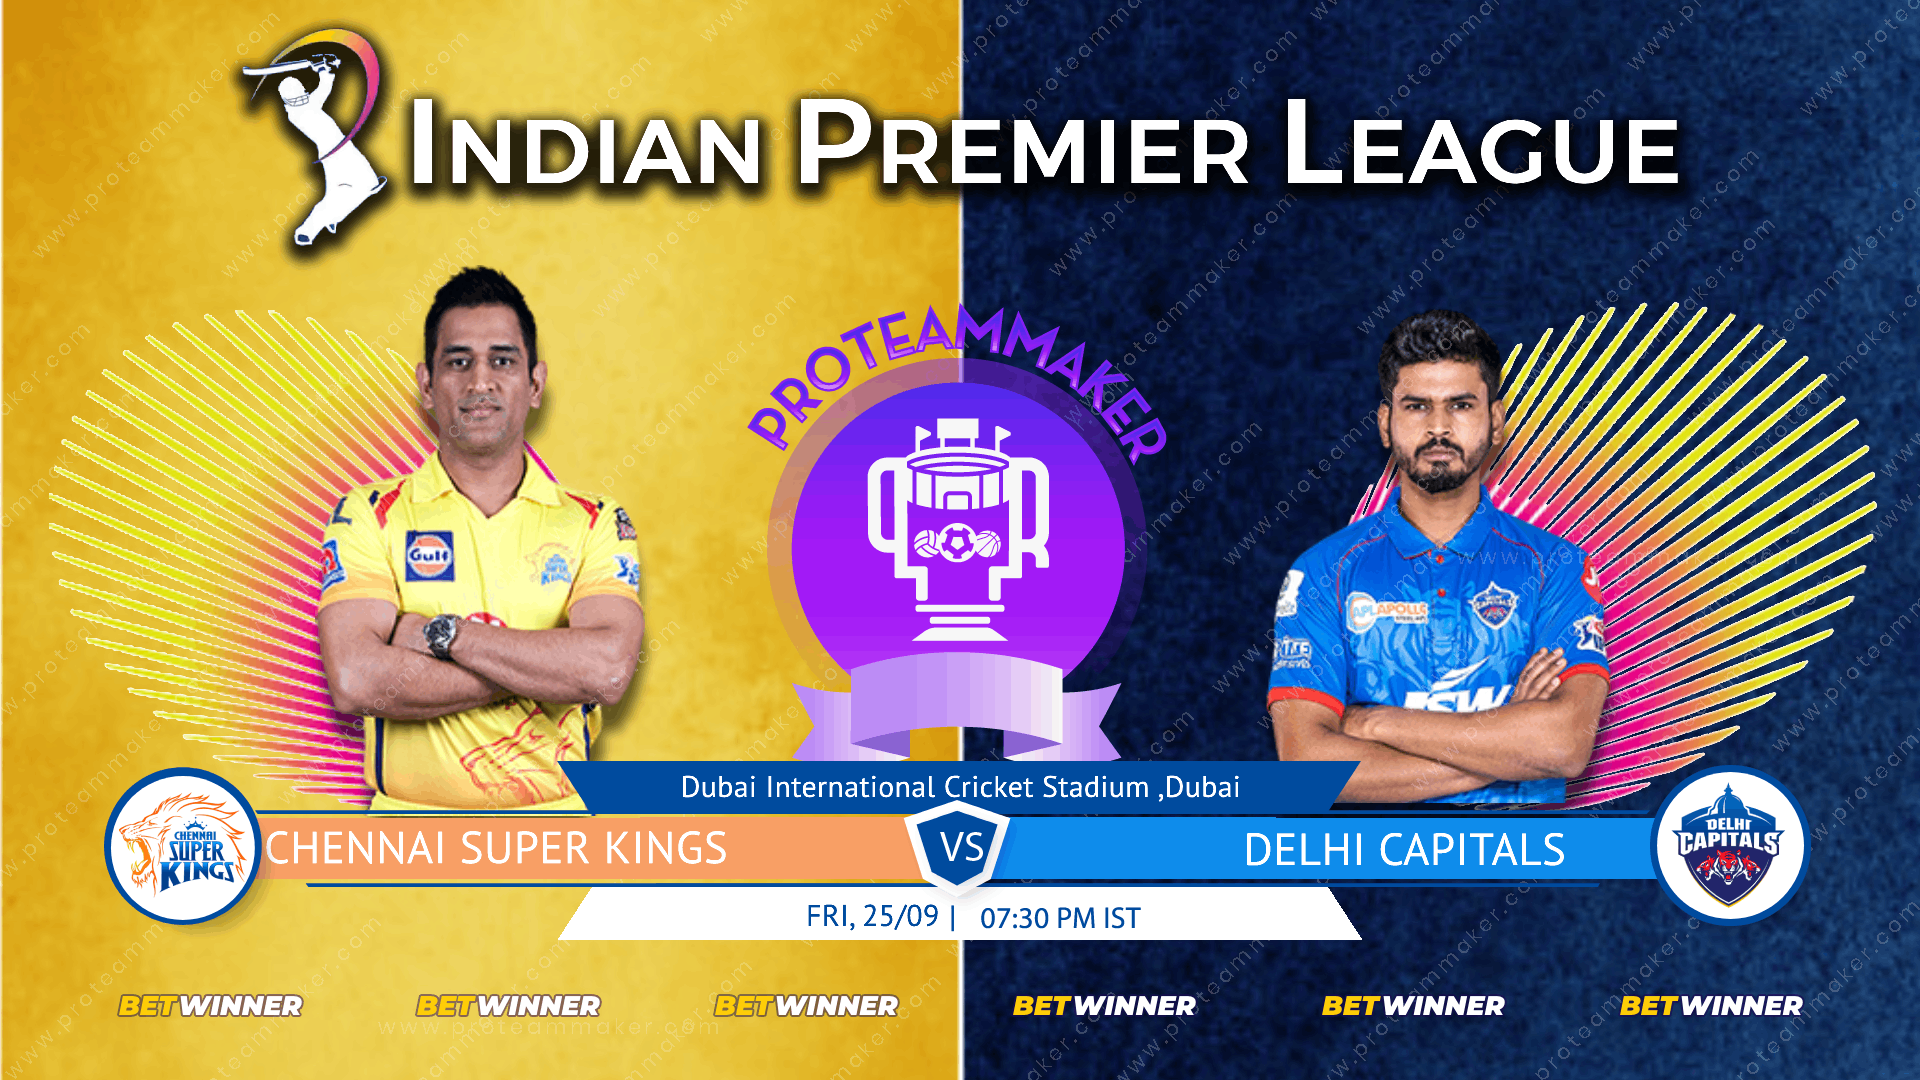 CSK vs DC Dream11 Team Prediction. You will get CSK vs DC Dream11 Team Players Records and Dream11 Team Tips, News, and Prediction for Fantasy Cricket.